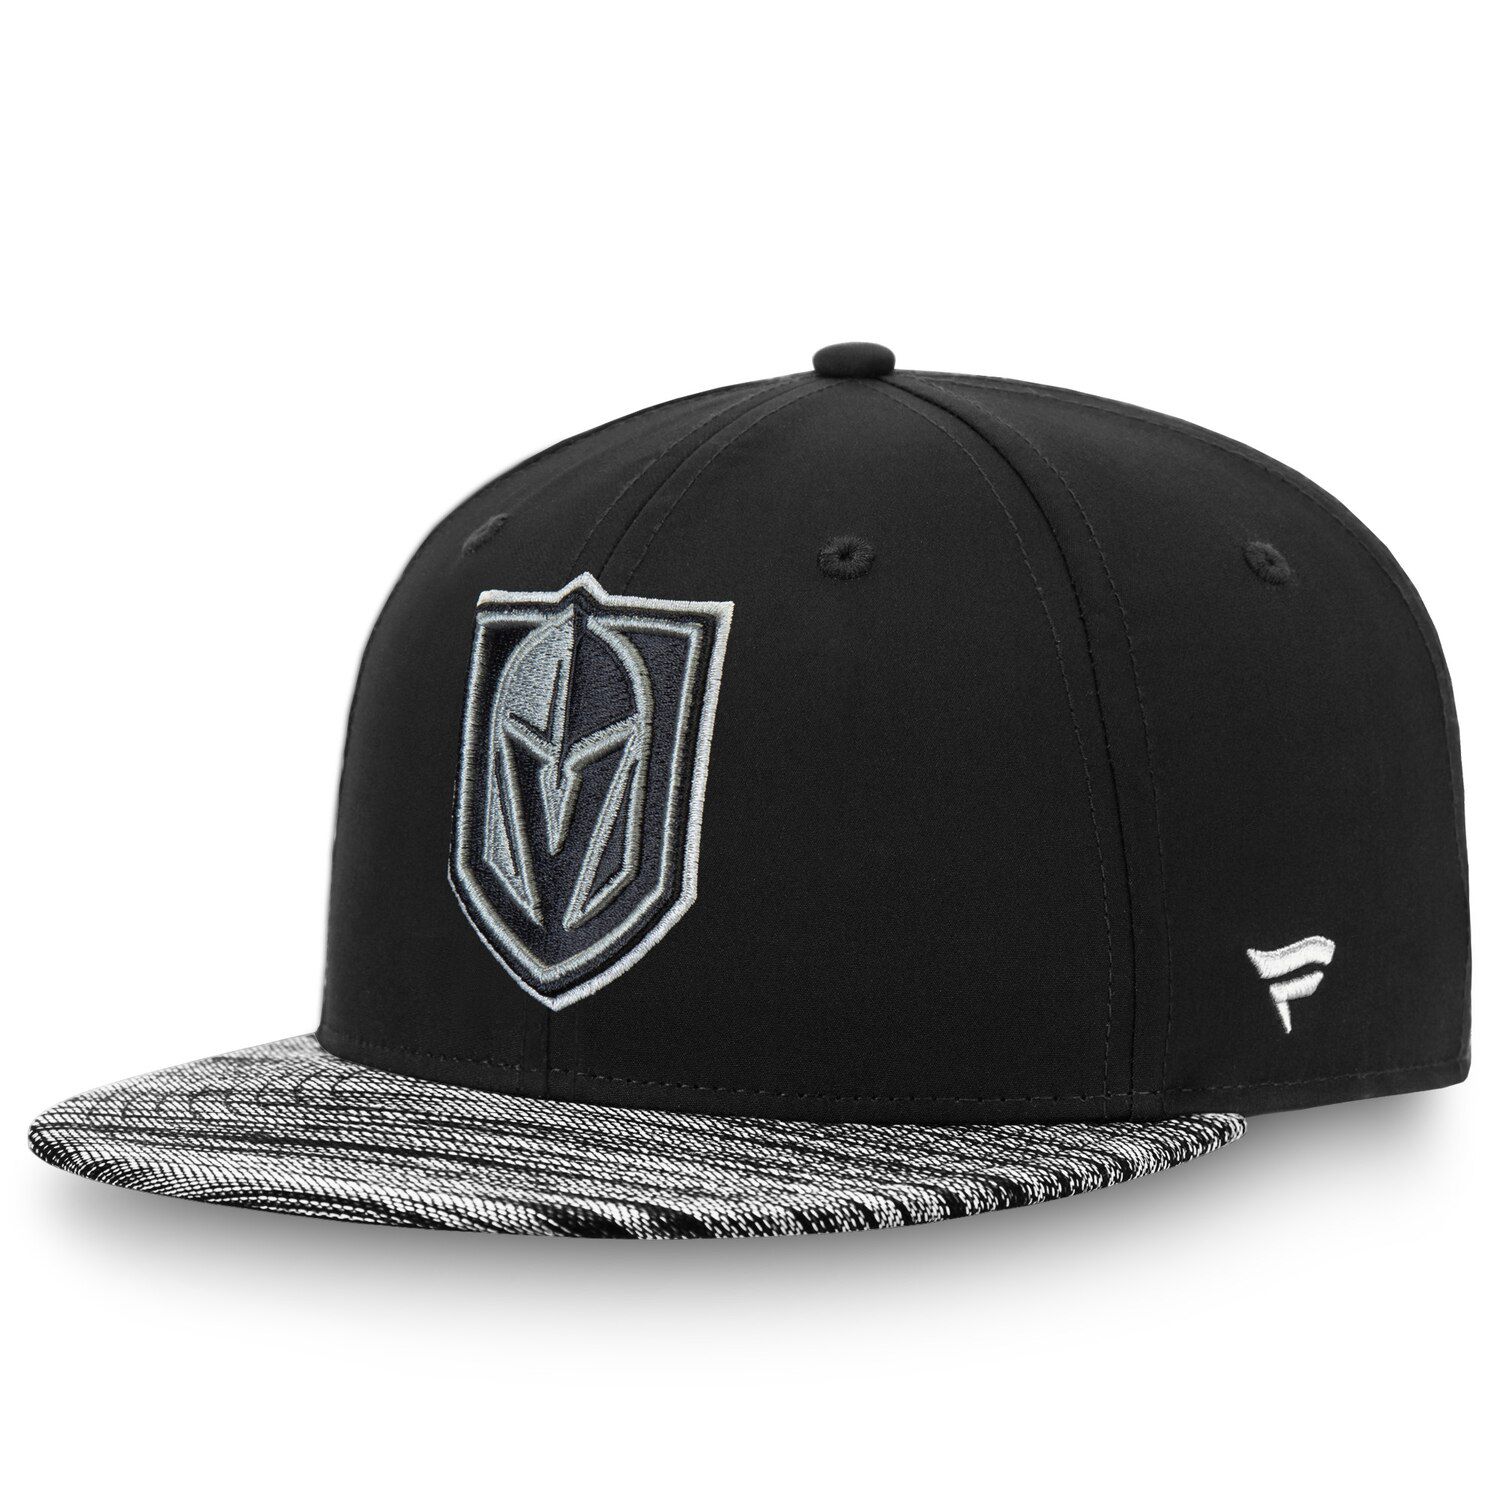 golden knights fitted hat